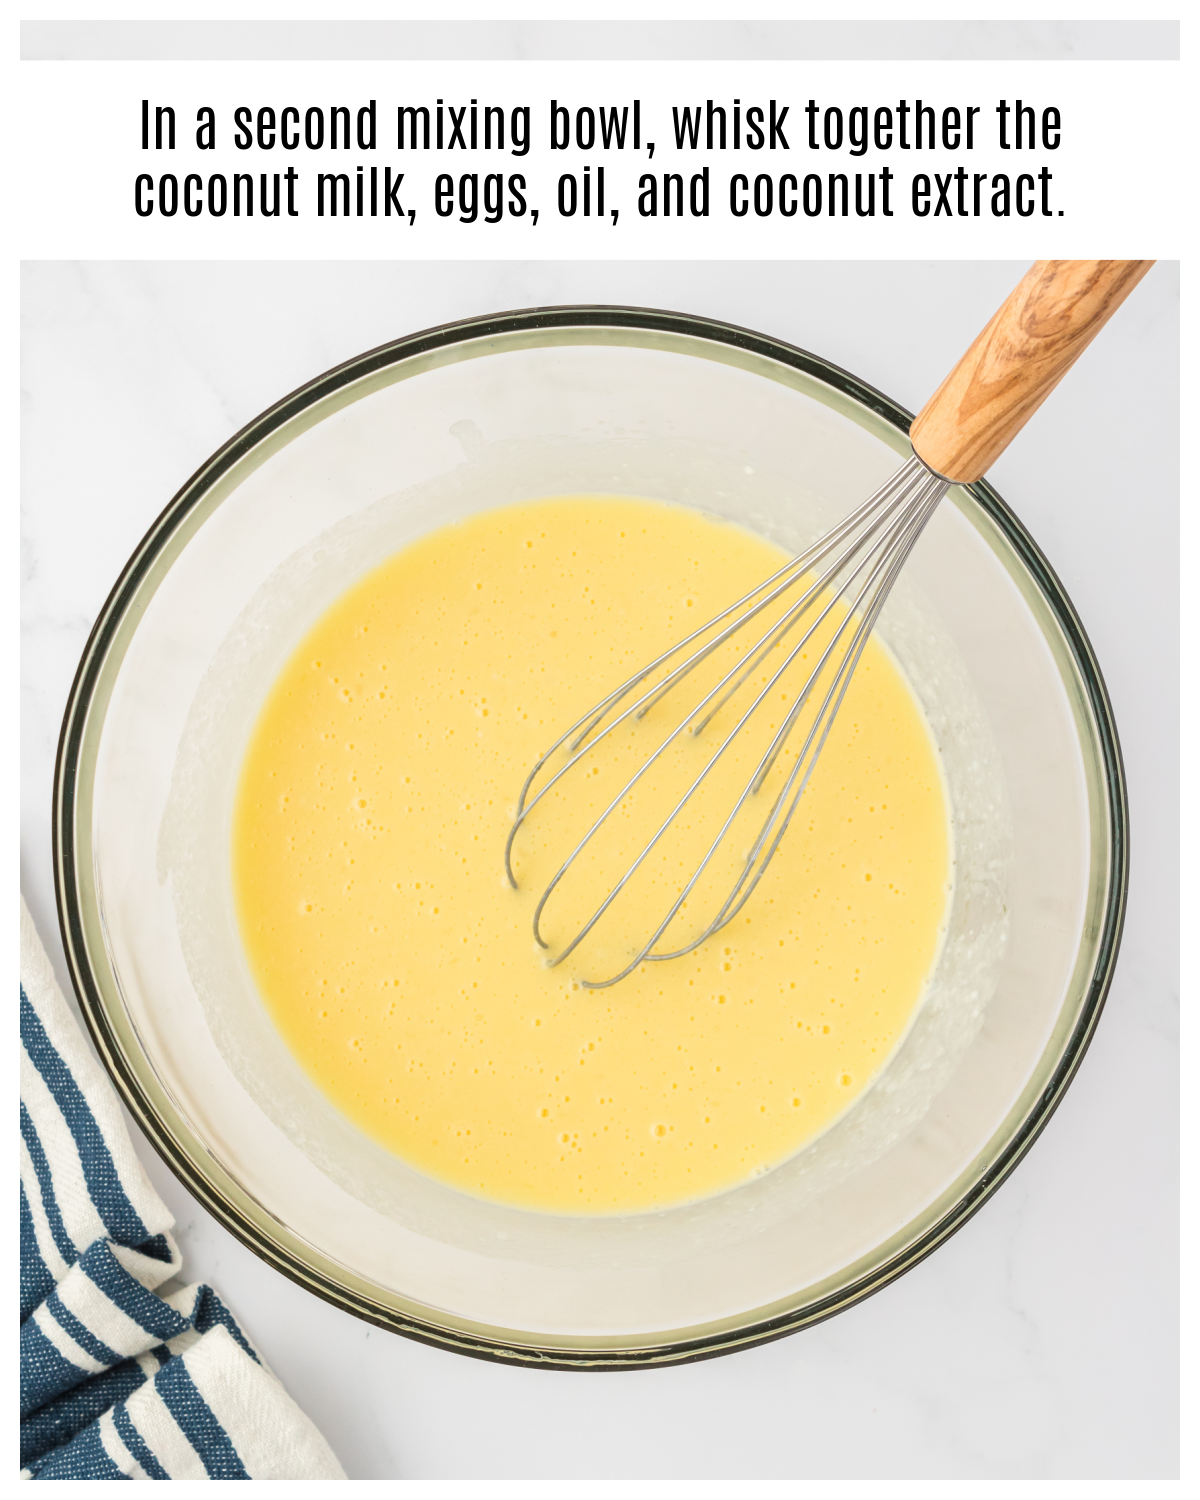 coconut milk, eggs, oil, and coconut extract whisked together in a bowl